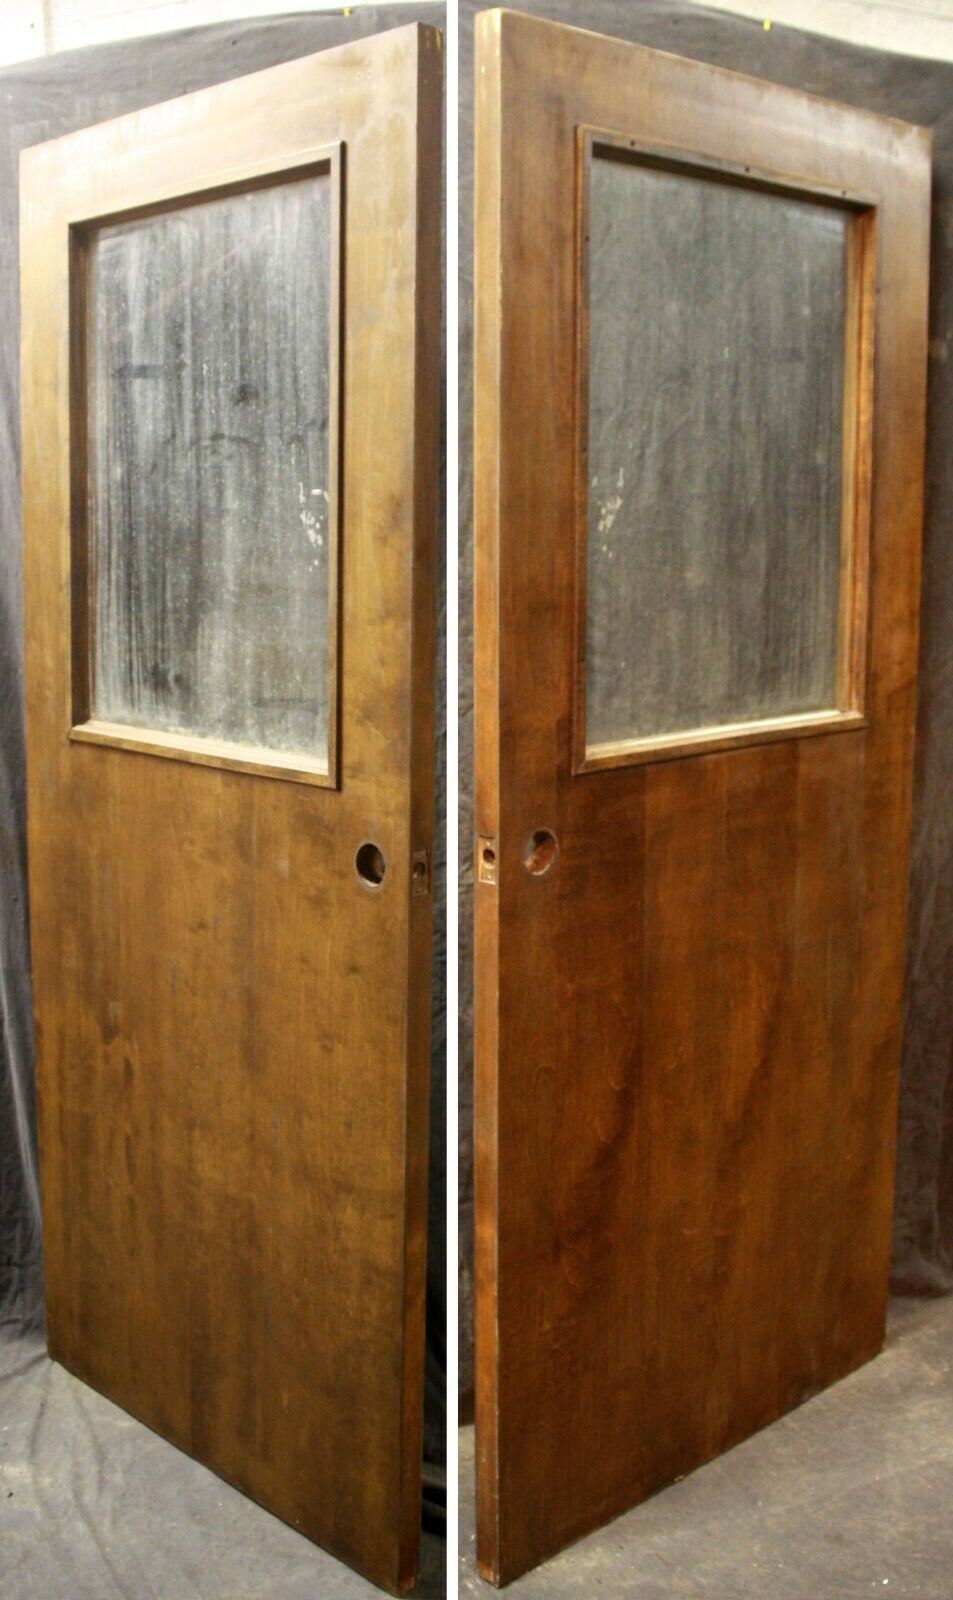 35.5"x79"x1.75" Antique Vintage Old Reclaimed Salvaged SOLID Wood Wooden Exterior Entry Door Window